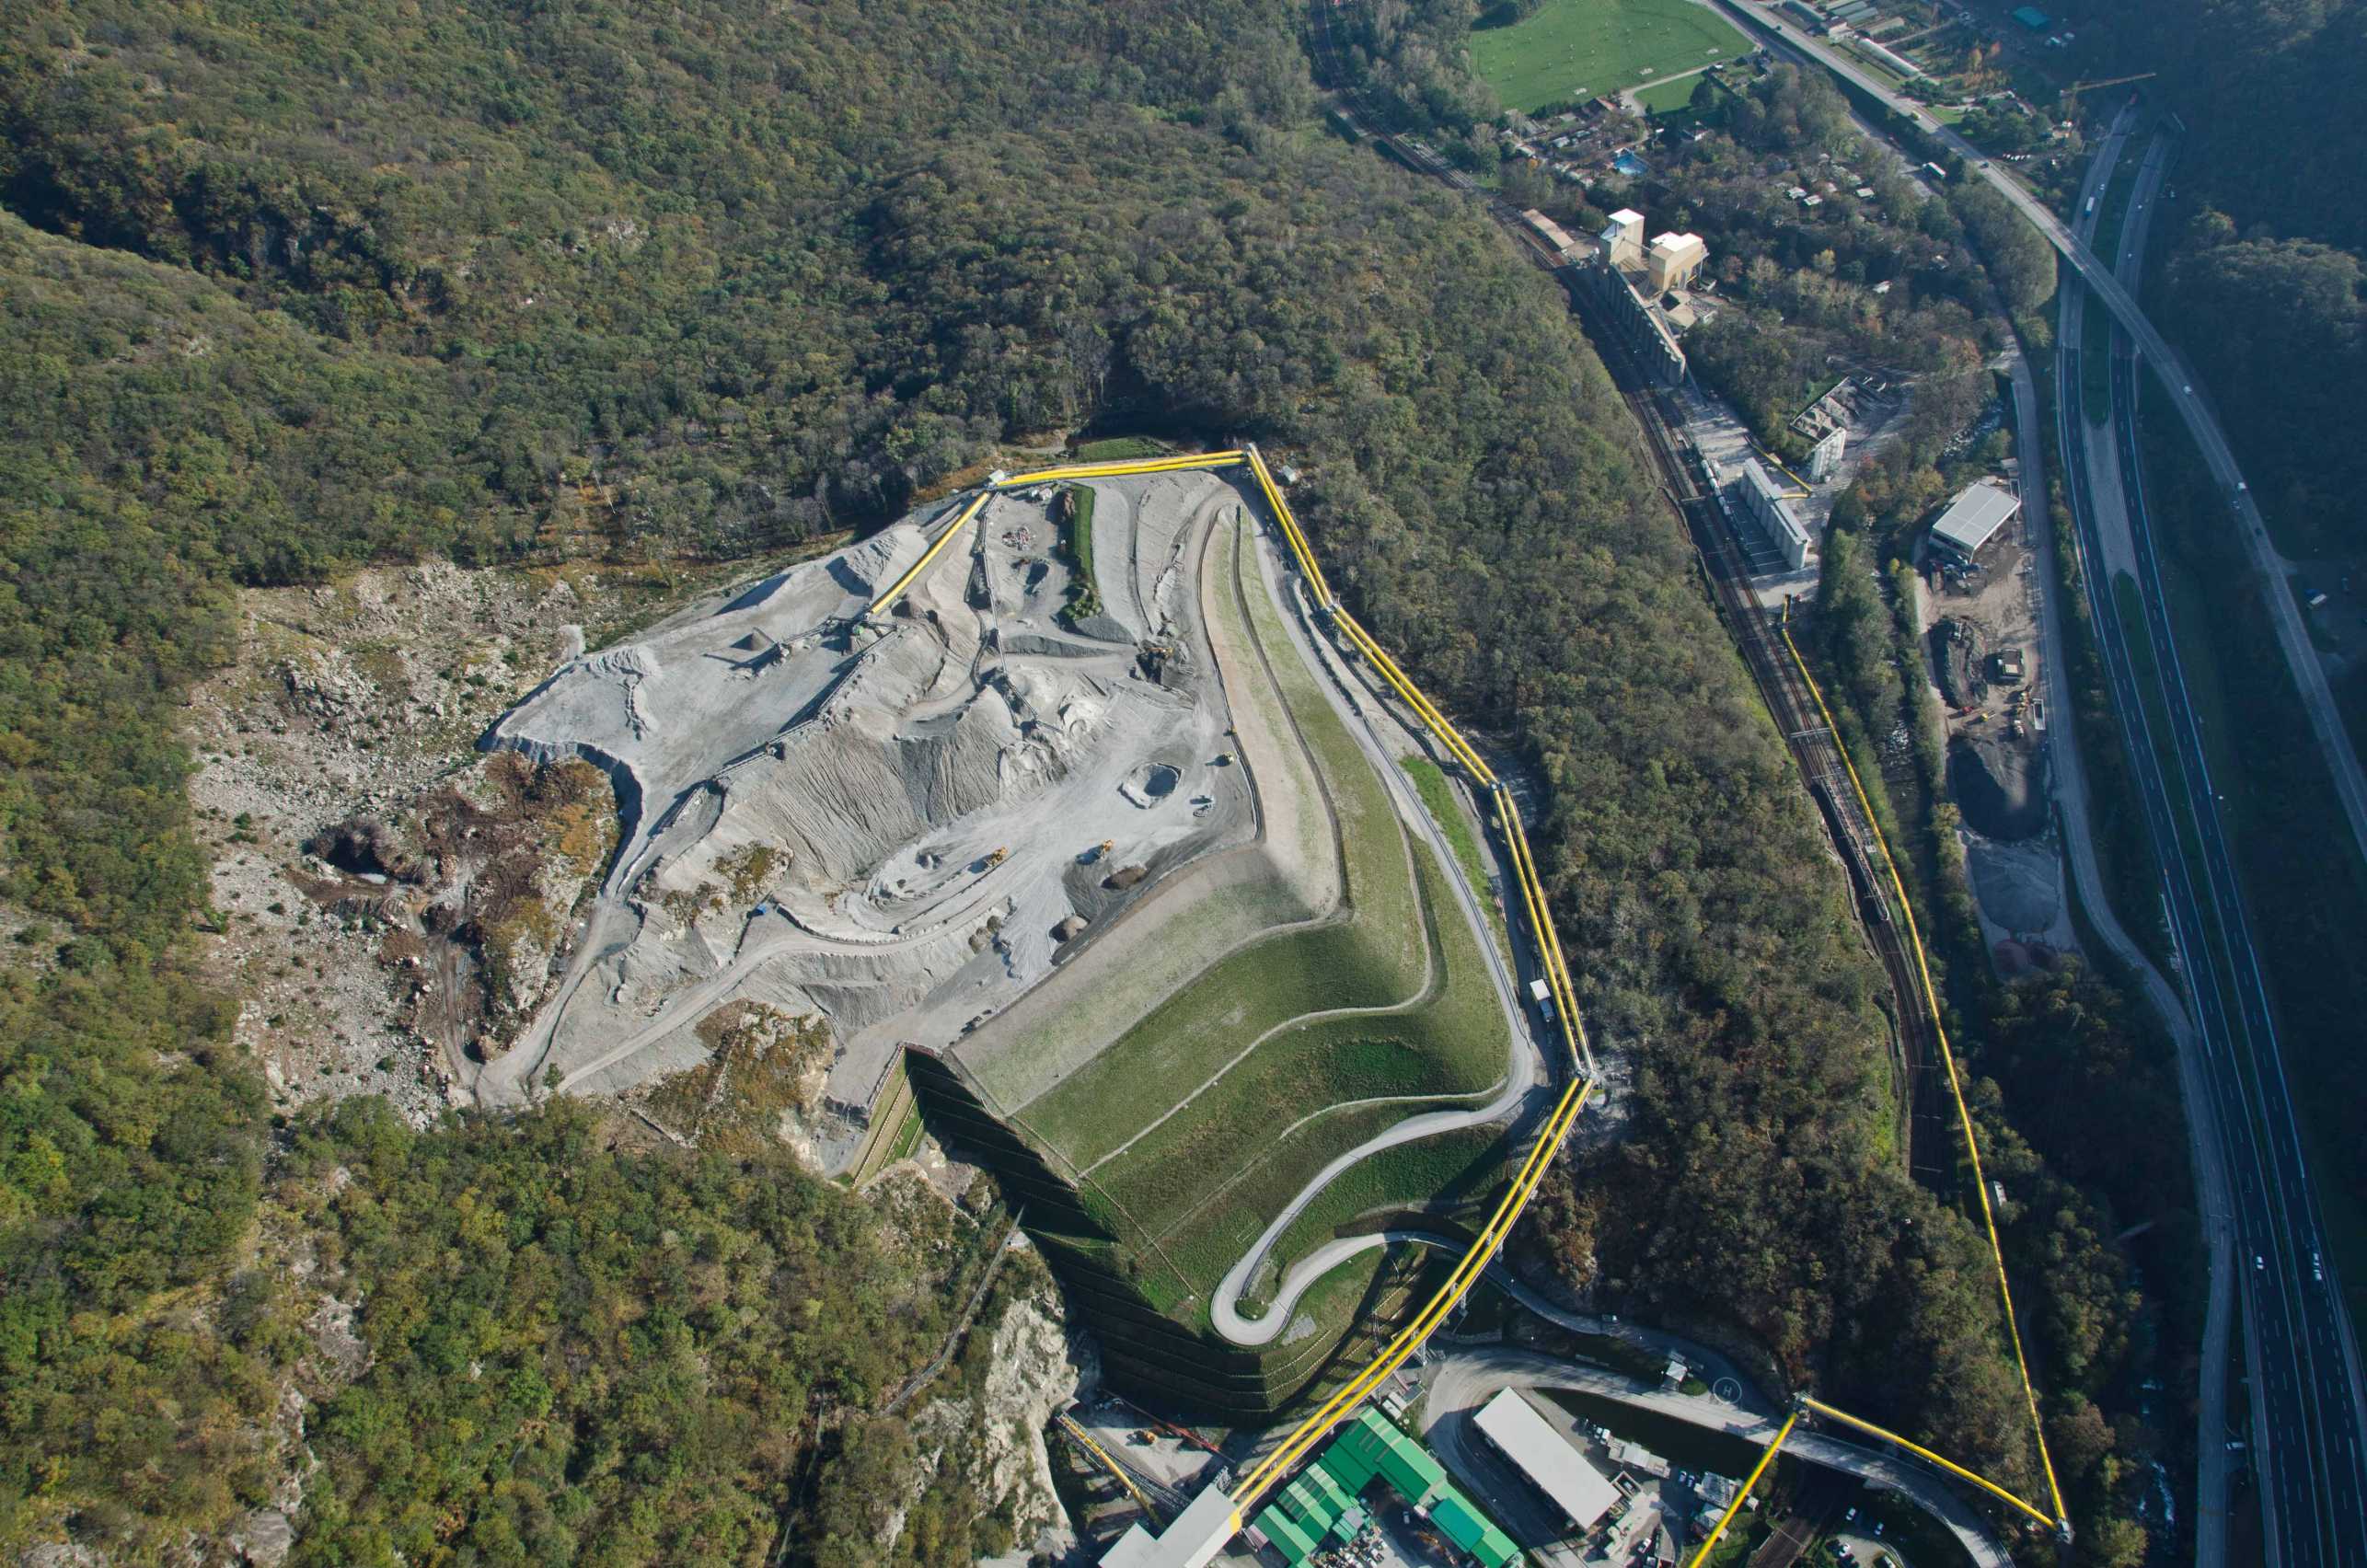 From a bird's-eye view, one can see the emerging terraced landscape on Monte Ceneri. A large gray area in the midst of greenery.